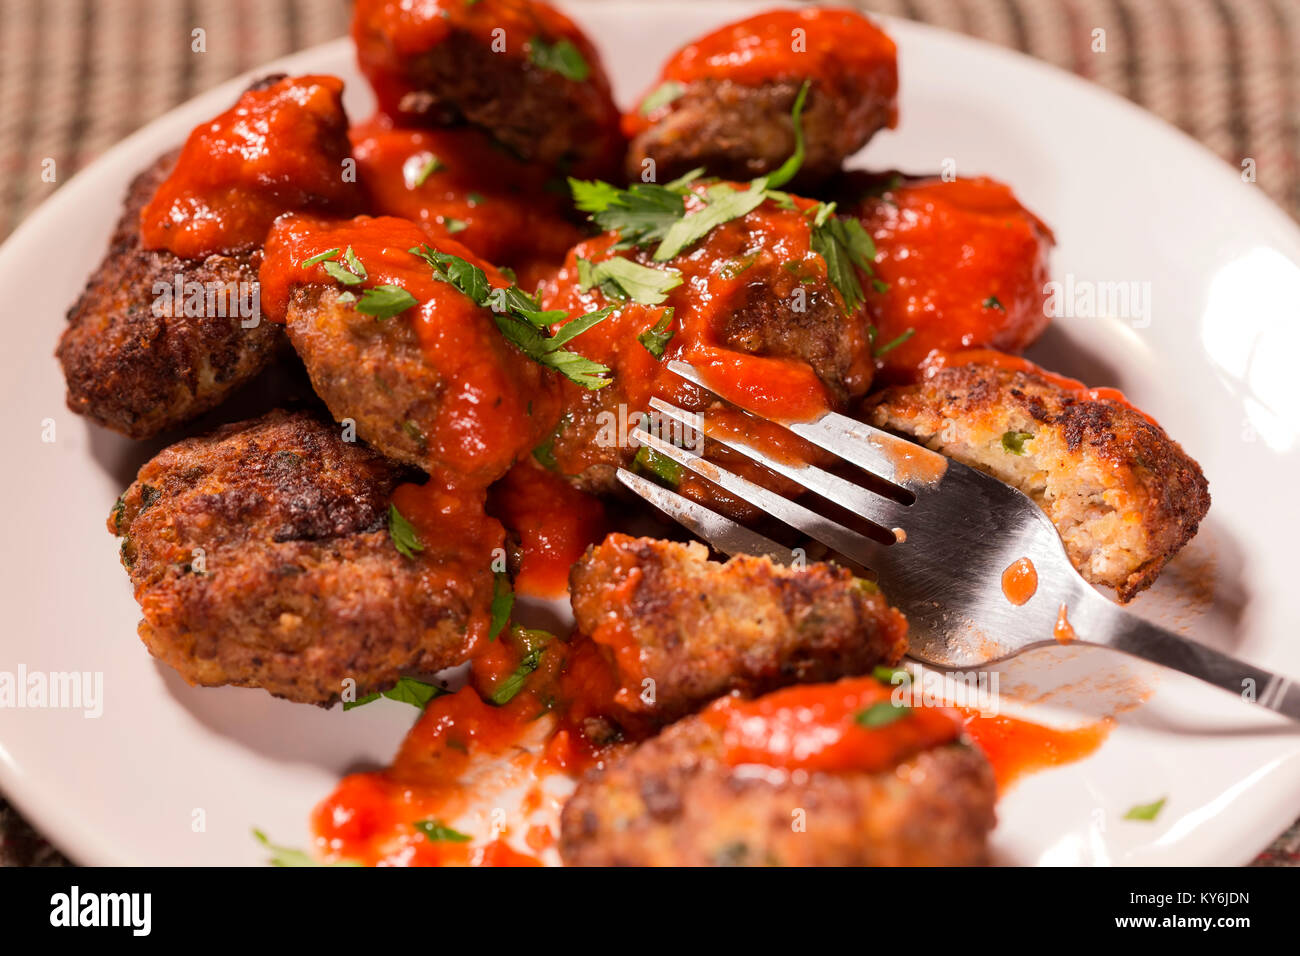 Eating fried meatballs made from pork and beef meat with tomato sauce and herbs on plate Stock Photo